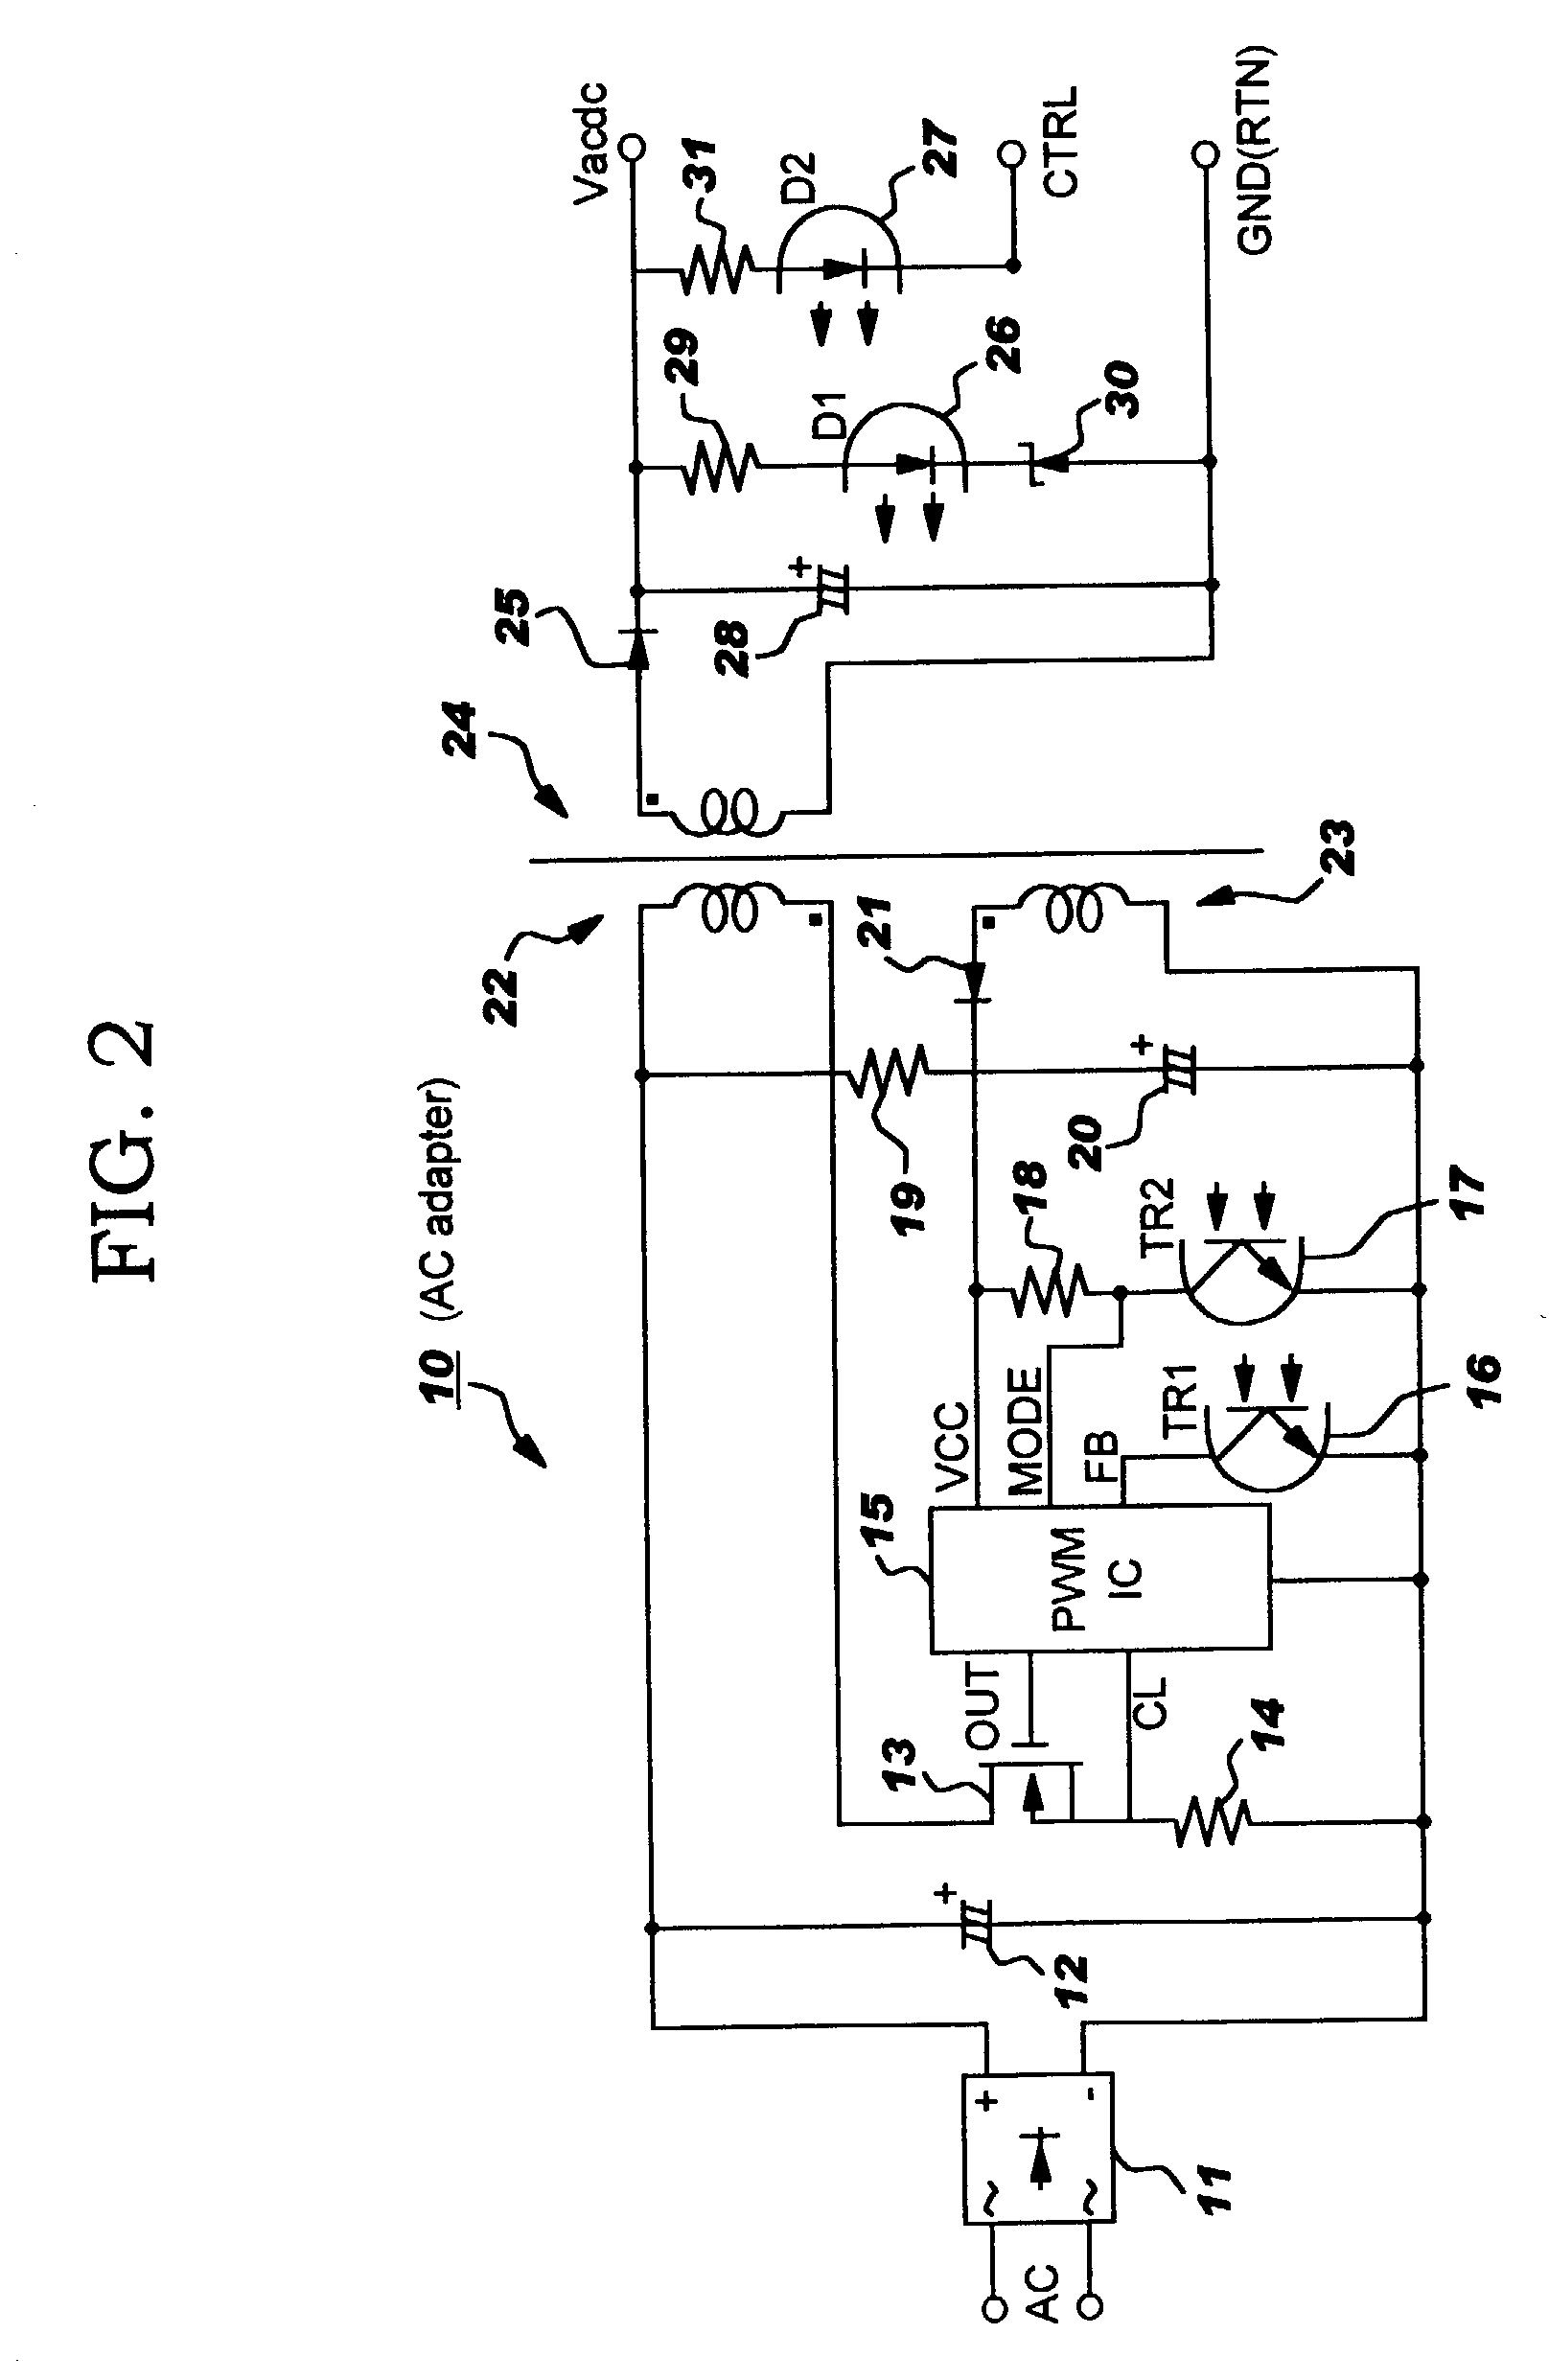 Method and apparatus for reducing power consumption in a power supply